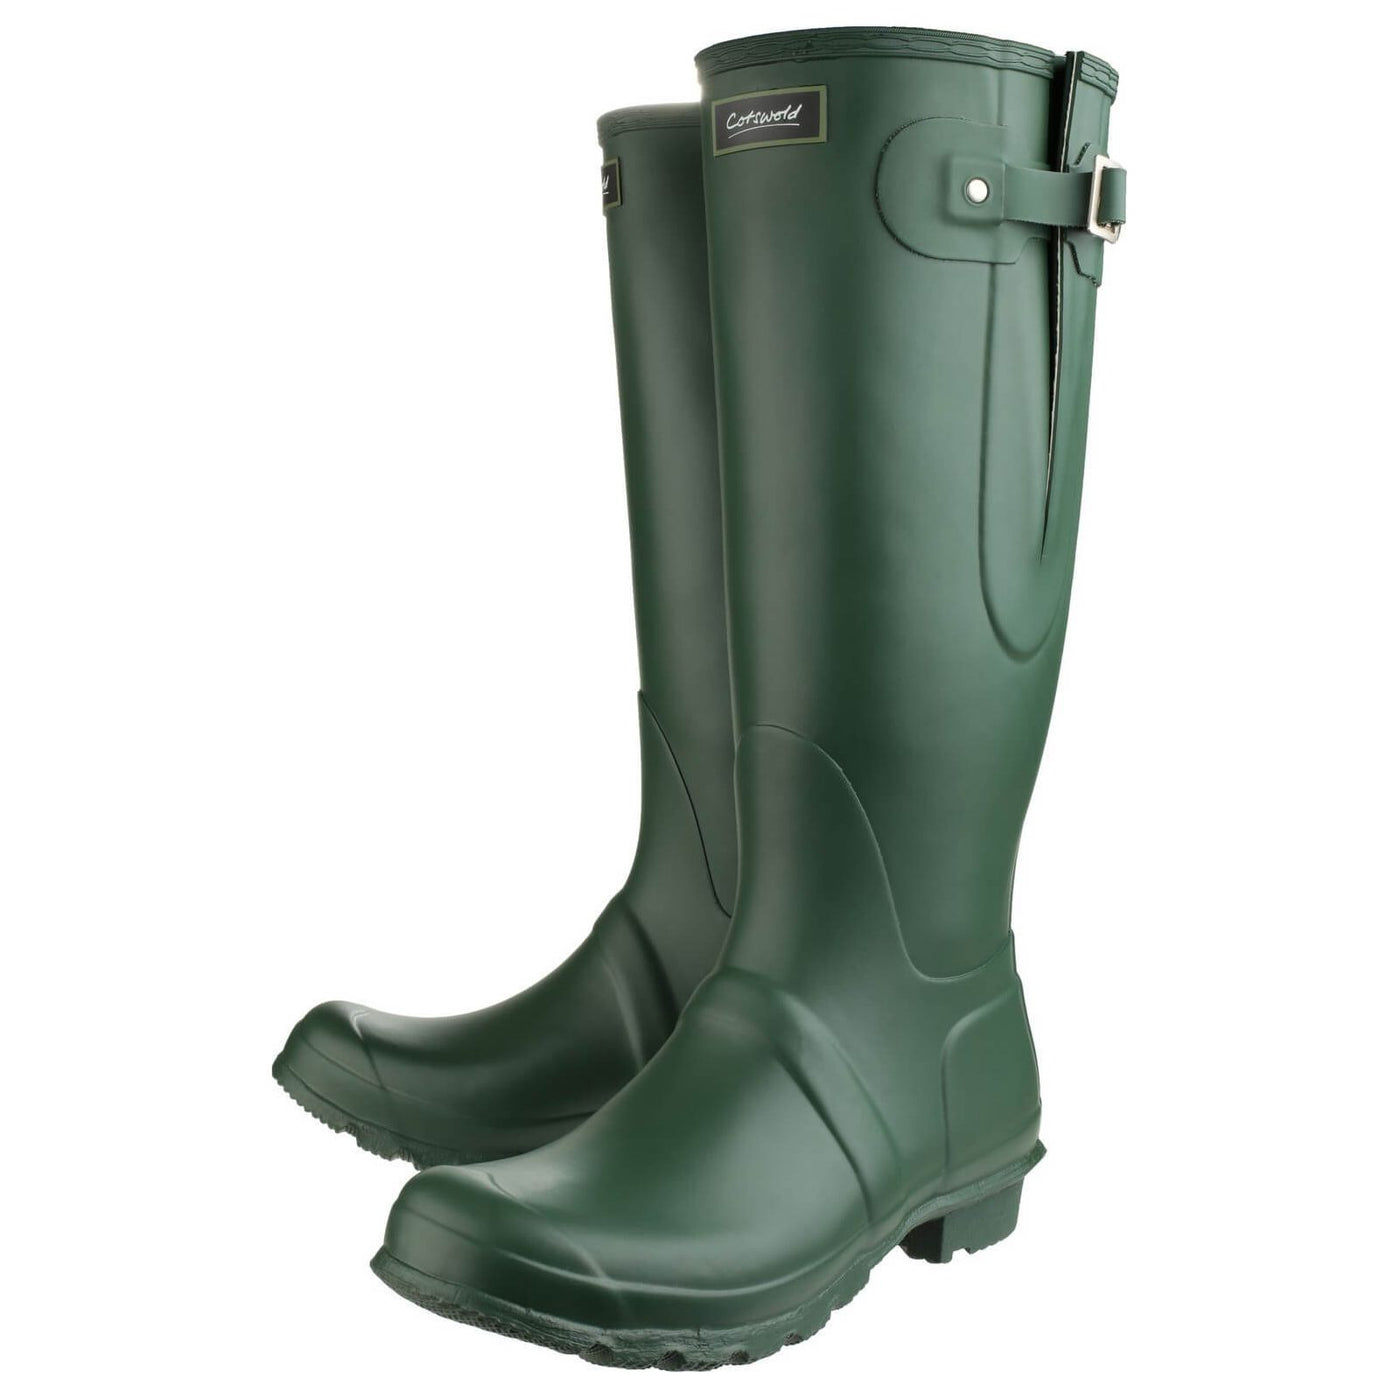 Cotswold Windsor High Wellies-Green -5